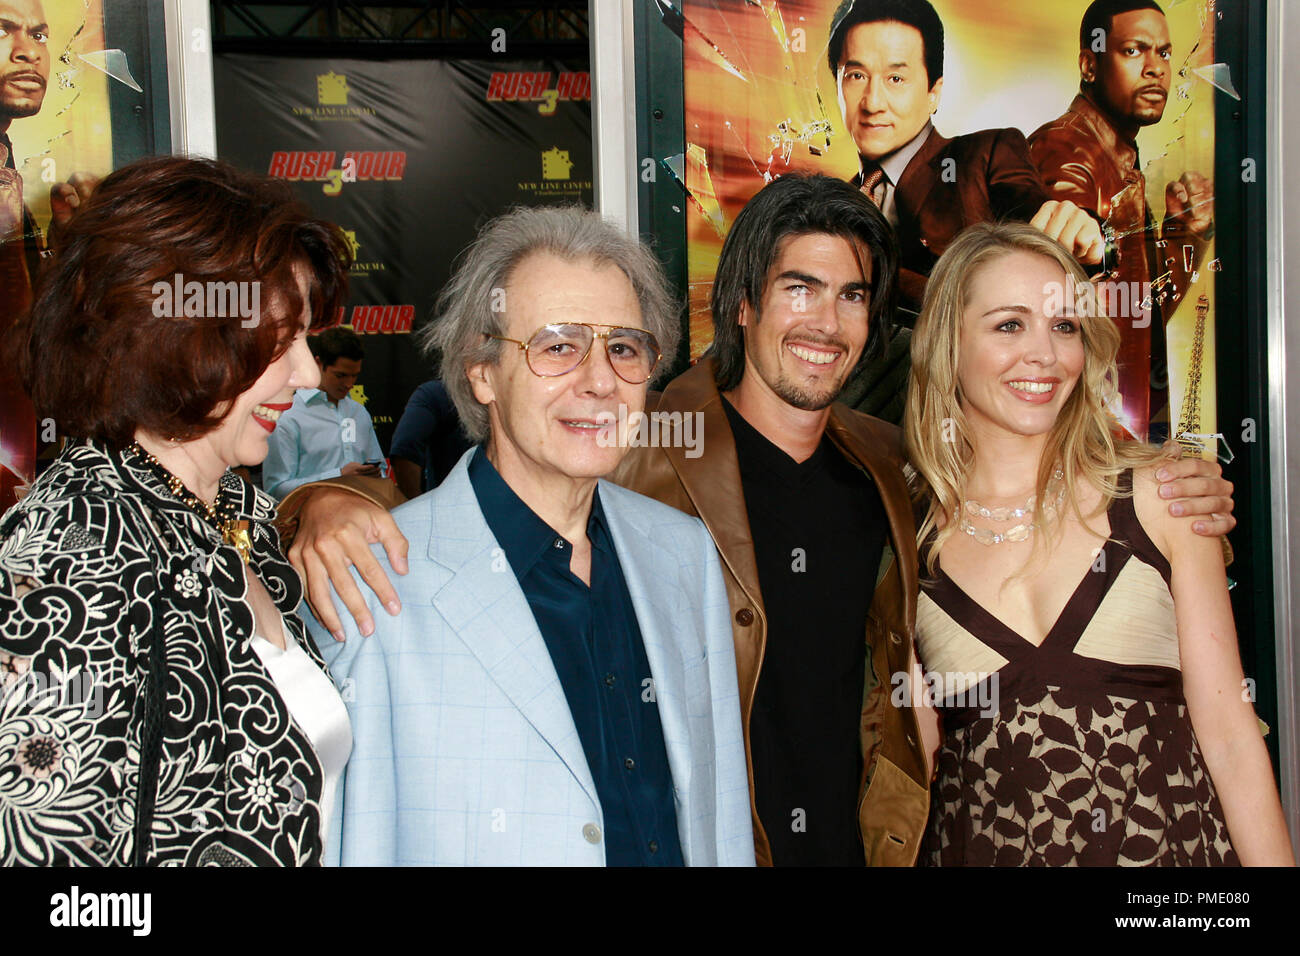 'Rush Hour 3' (Premiere)  Composer Lalo Schifrin 7-30-2007 / Mann's Chinese Theater / Hollywood, CA / New Line Cinema / © Joseph Martinez/Picturelux - All Rights Reserved  File Reference # 23135 0003PLX   For Editorial Use Only -  All Rights Reserved Stock Photo